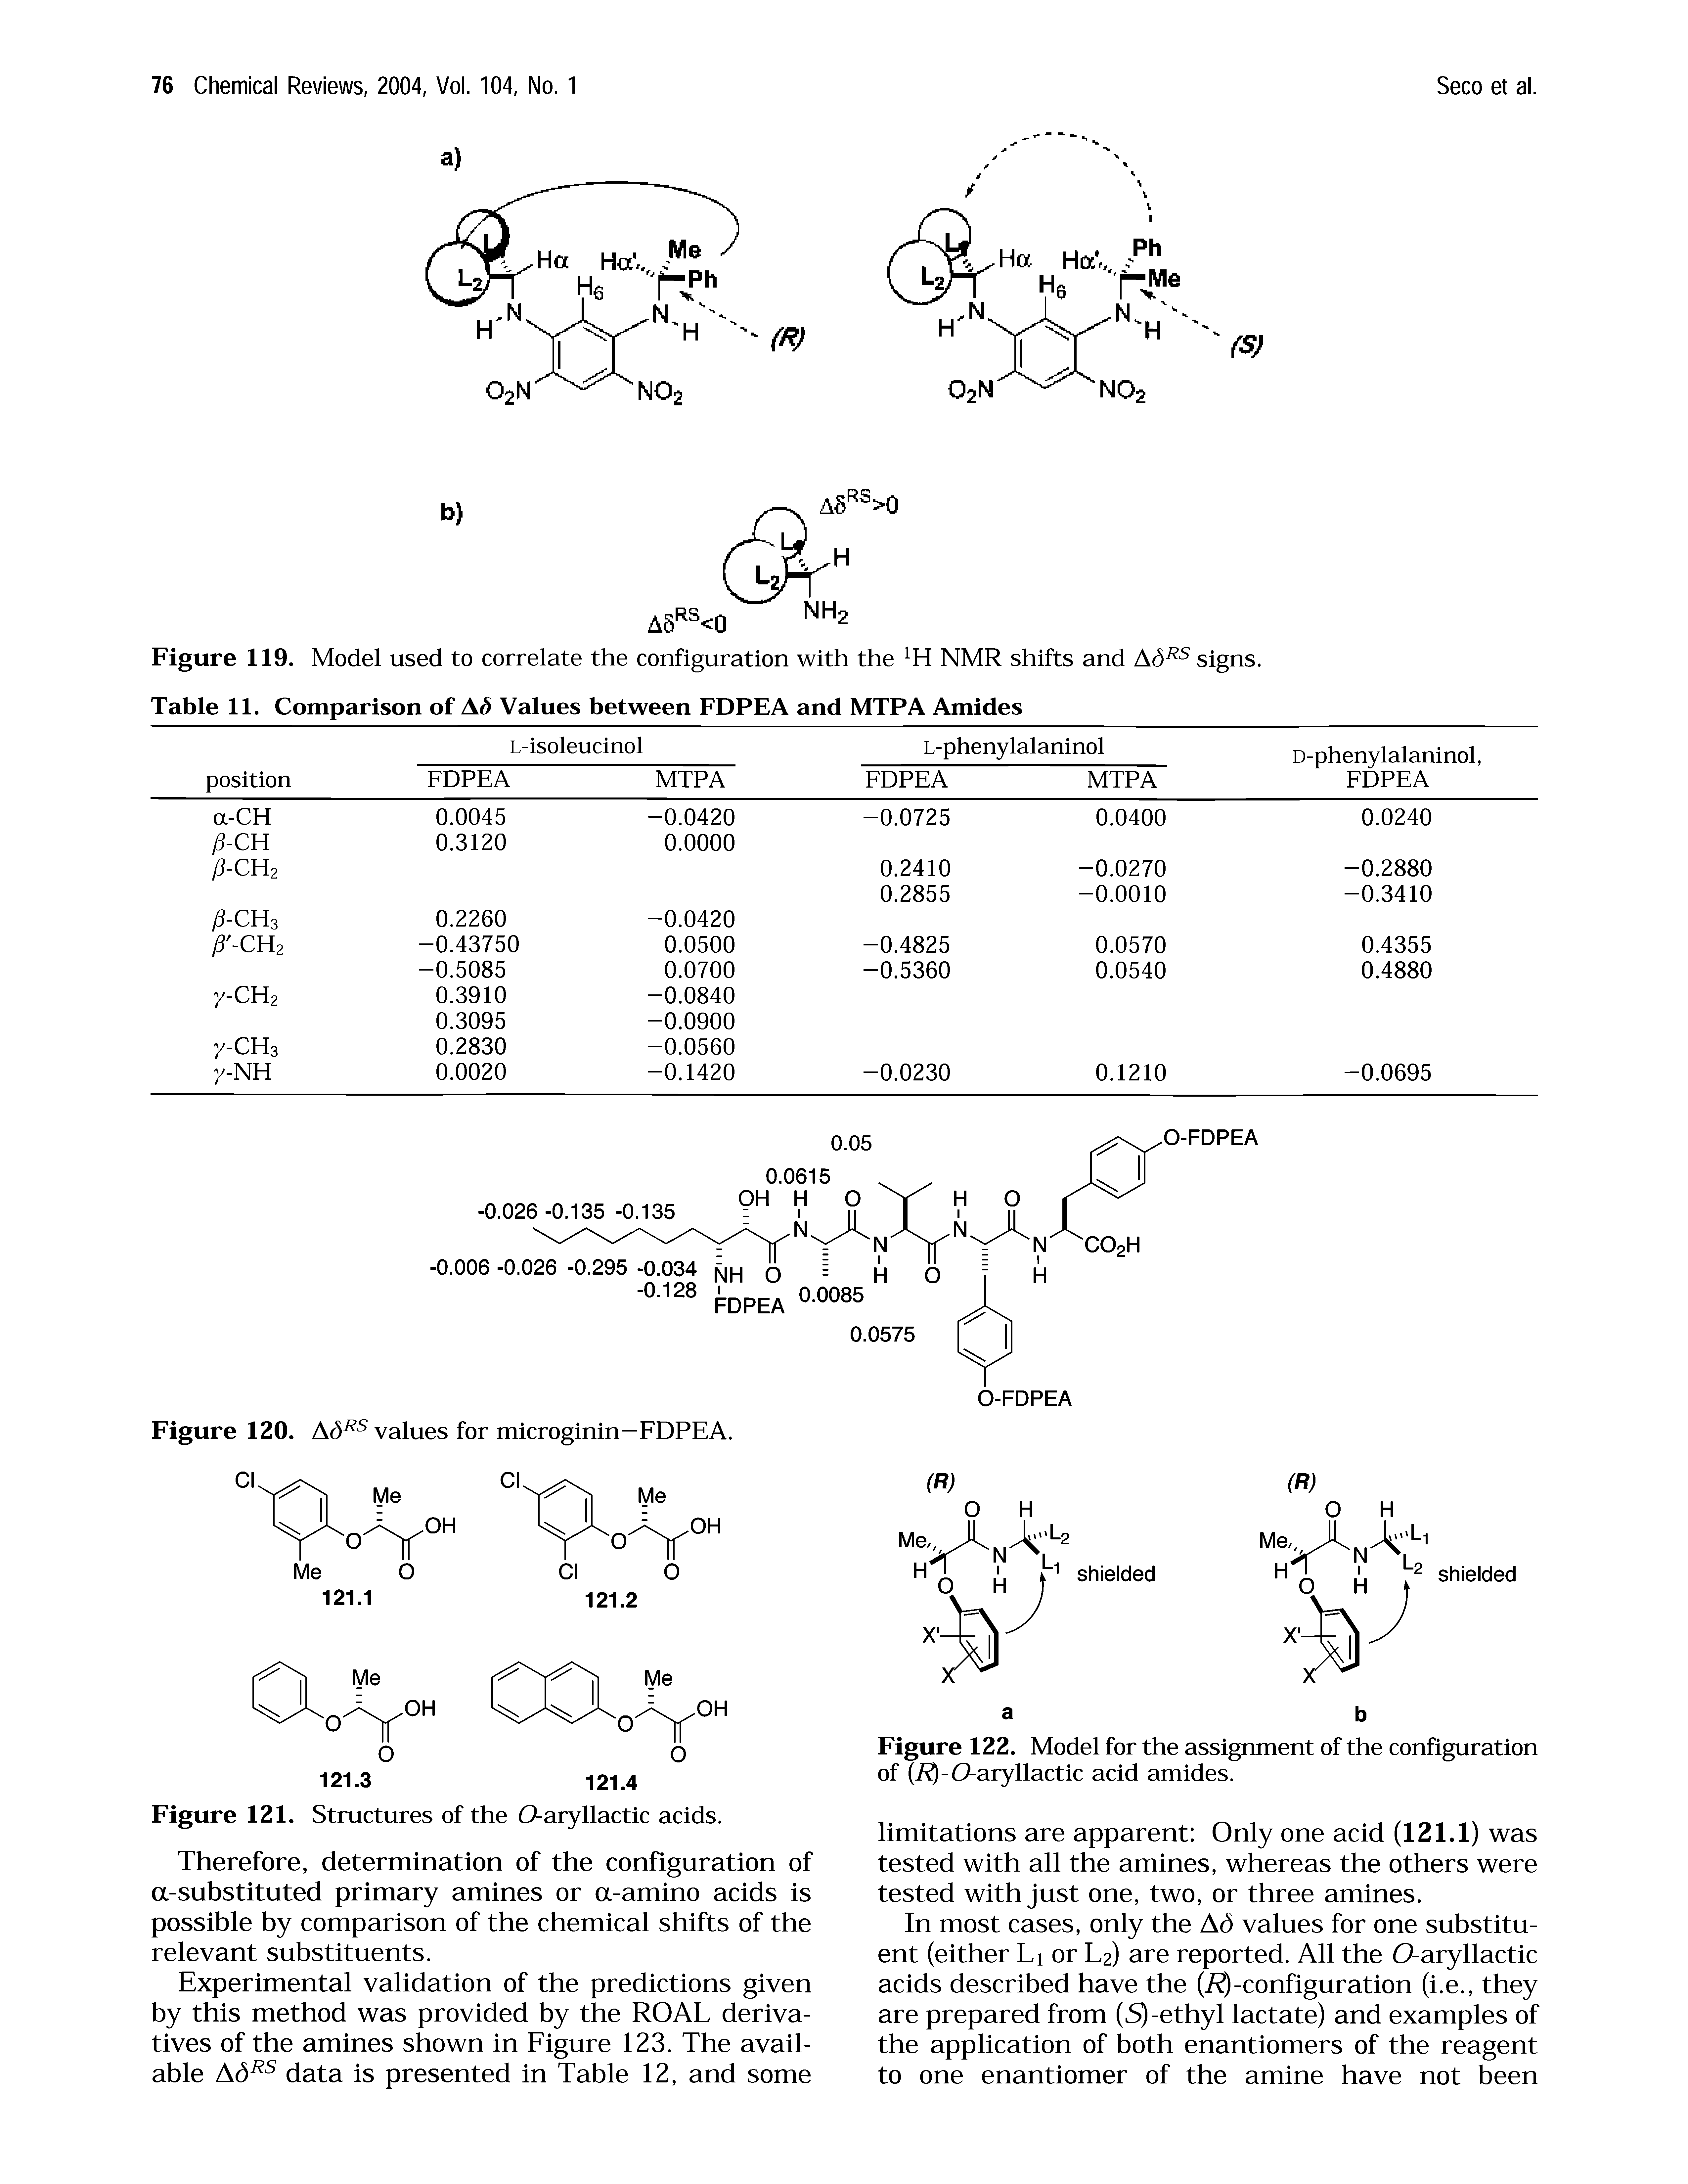 Figure 122. Model for the assignment of the configuration of (7 -O-aryllactic acid amides.